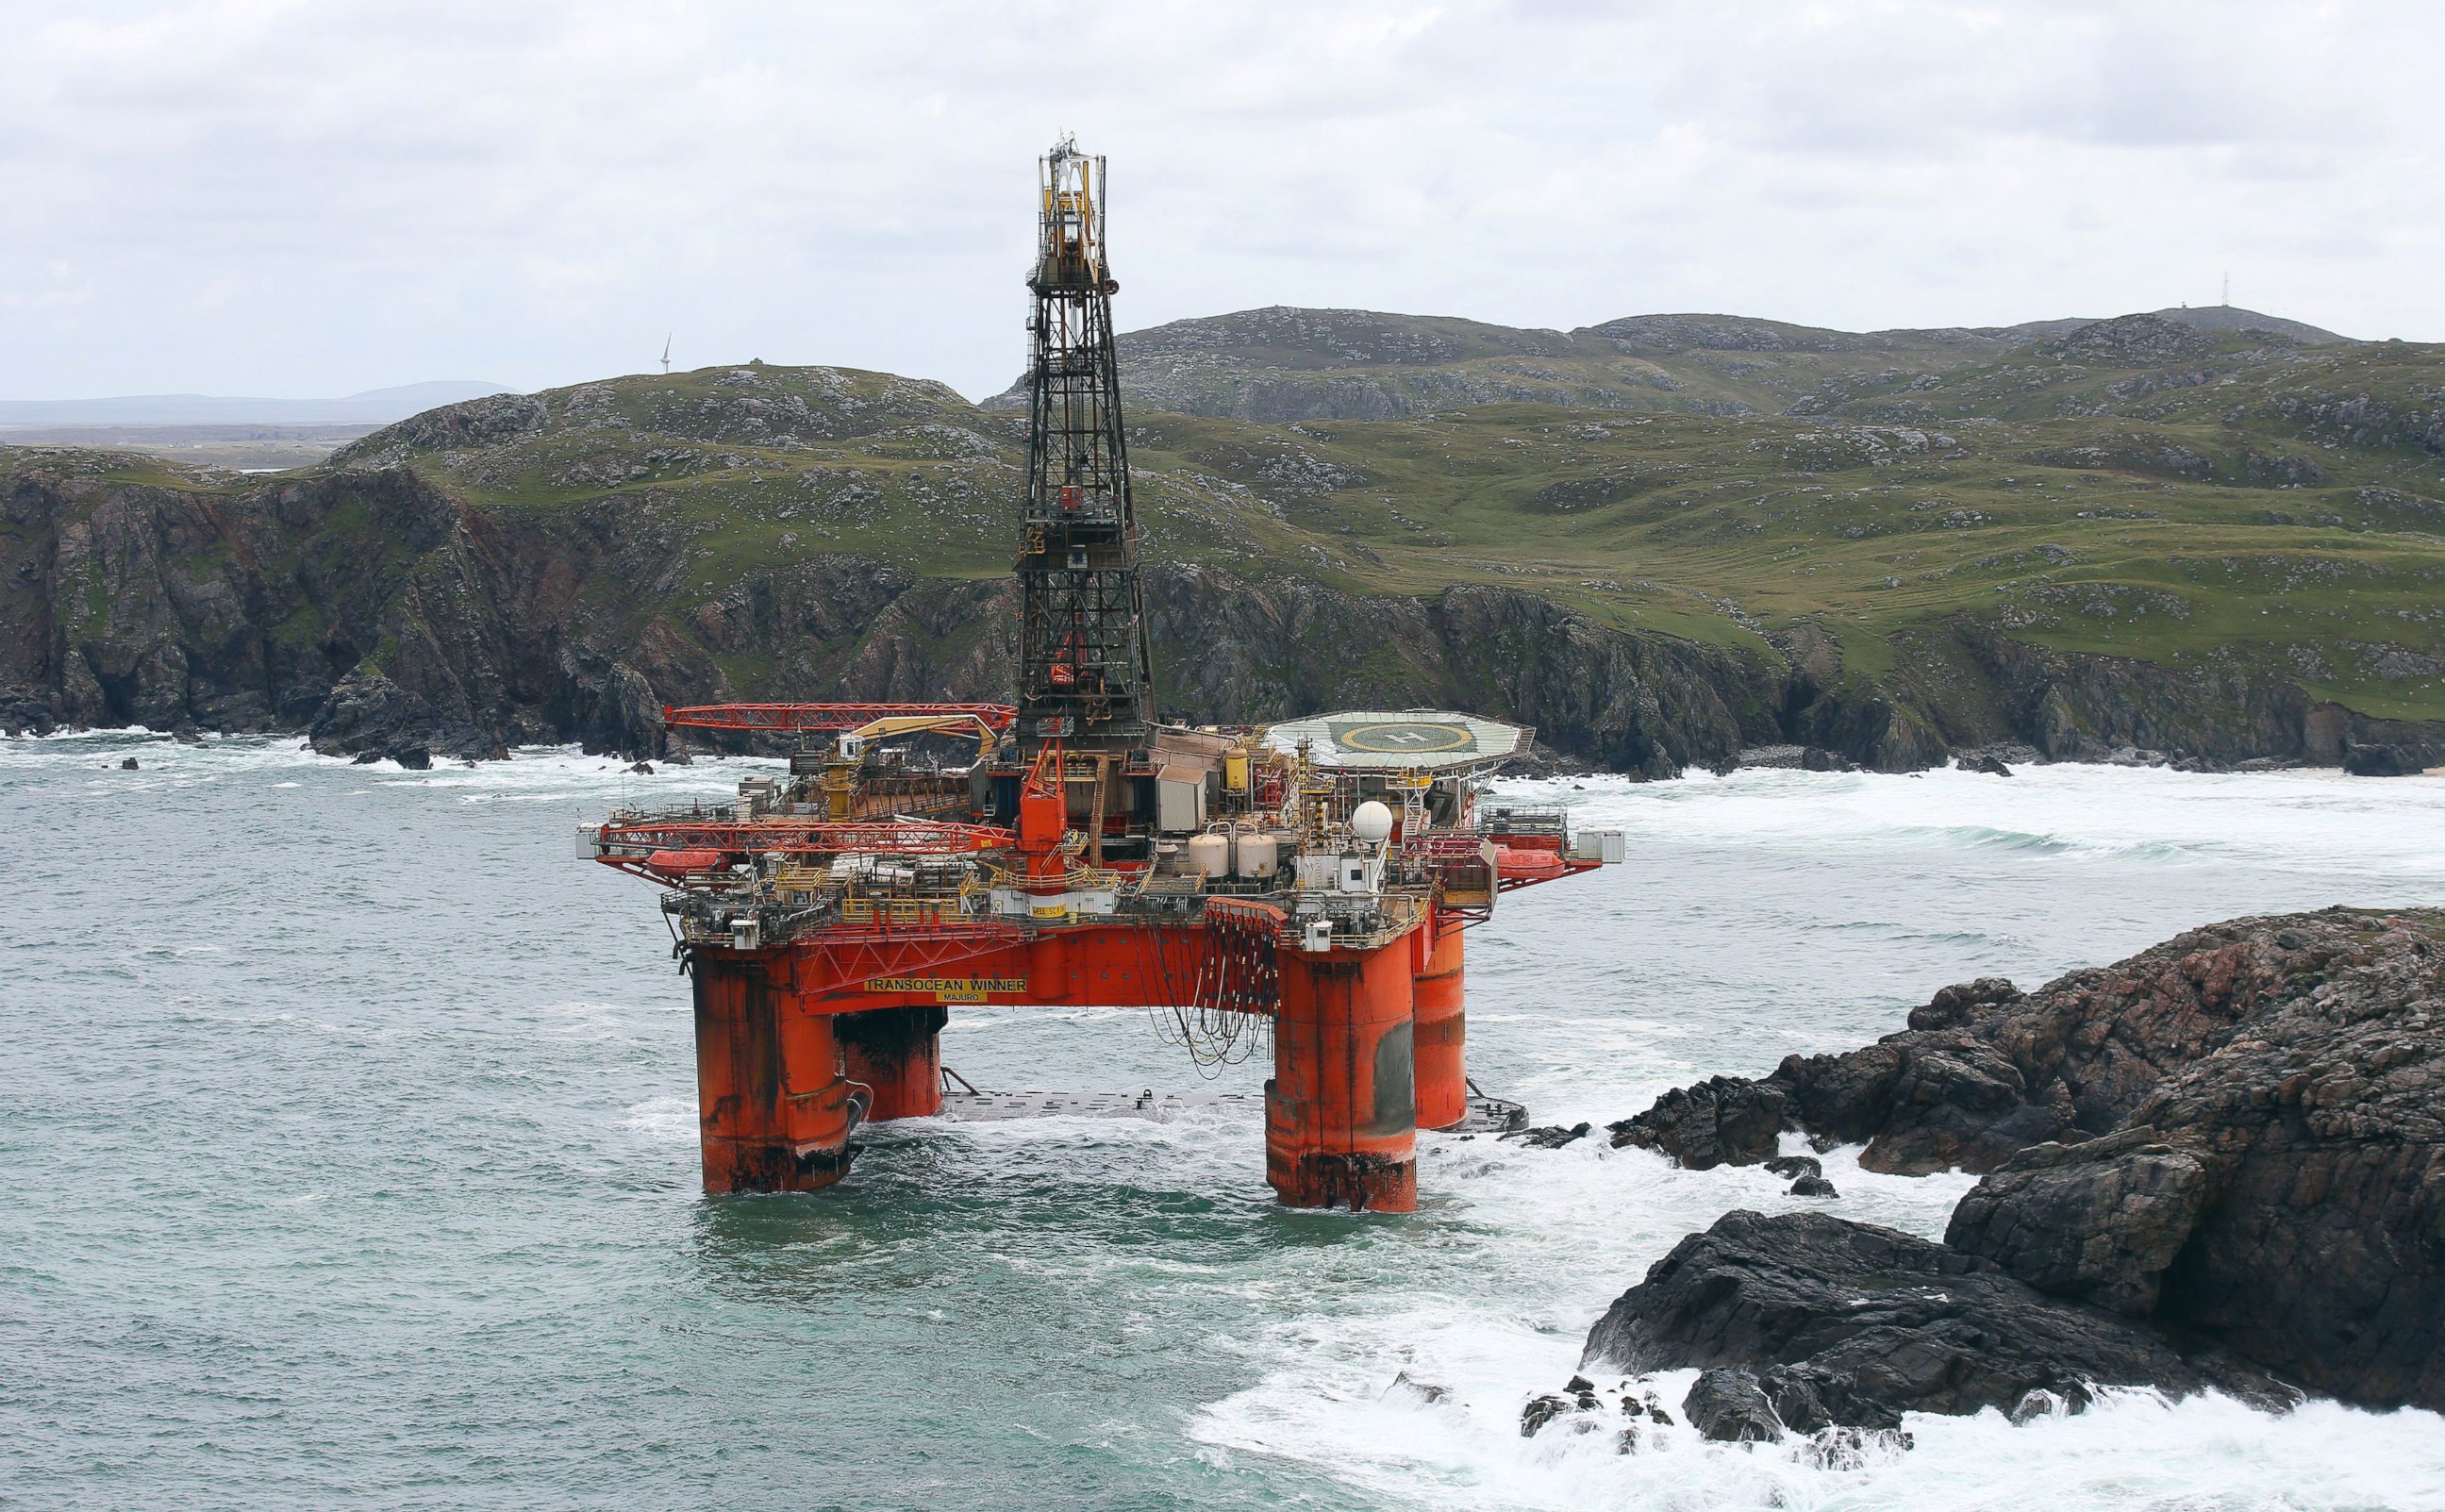 PHOTO: The Transocean Winner drilling rig is seen off the coast of the Isle of Lewis, Scotland, after it ran aground in severe weather conditions, Aug. 9, 2016. 